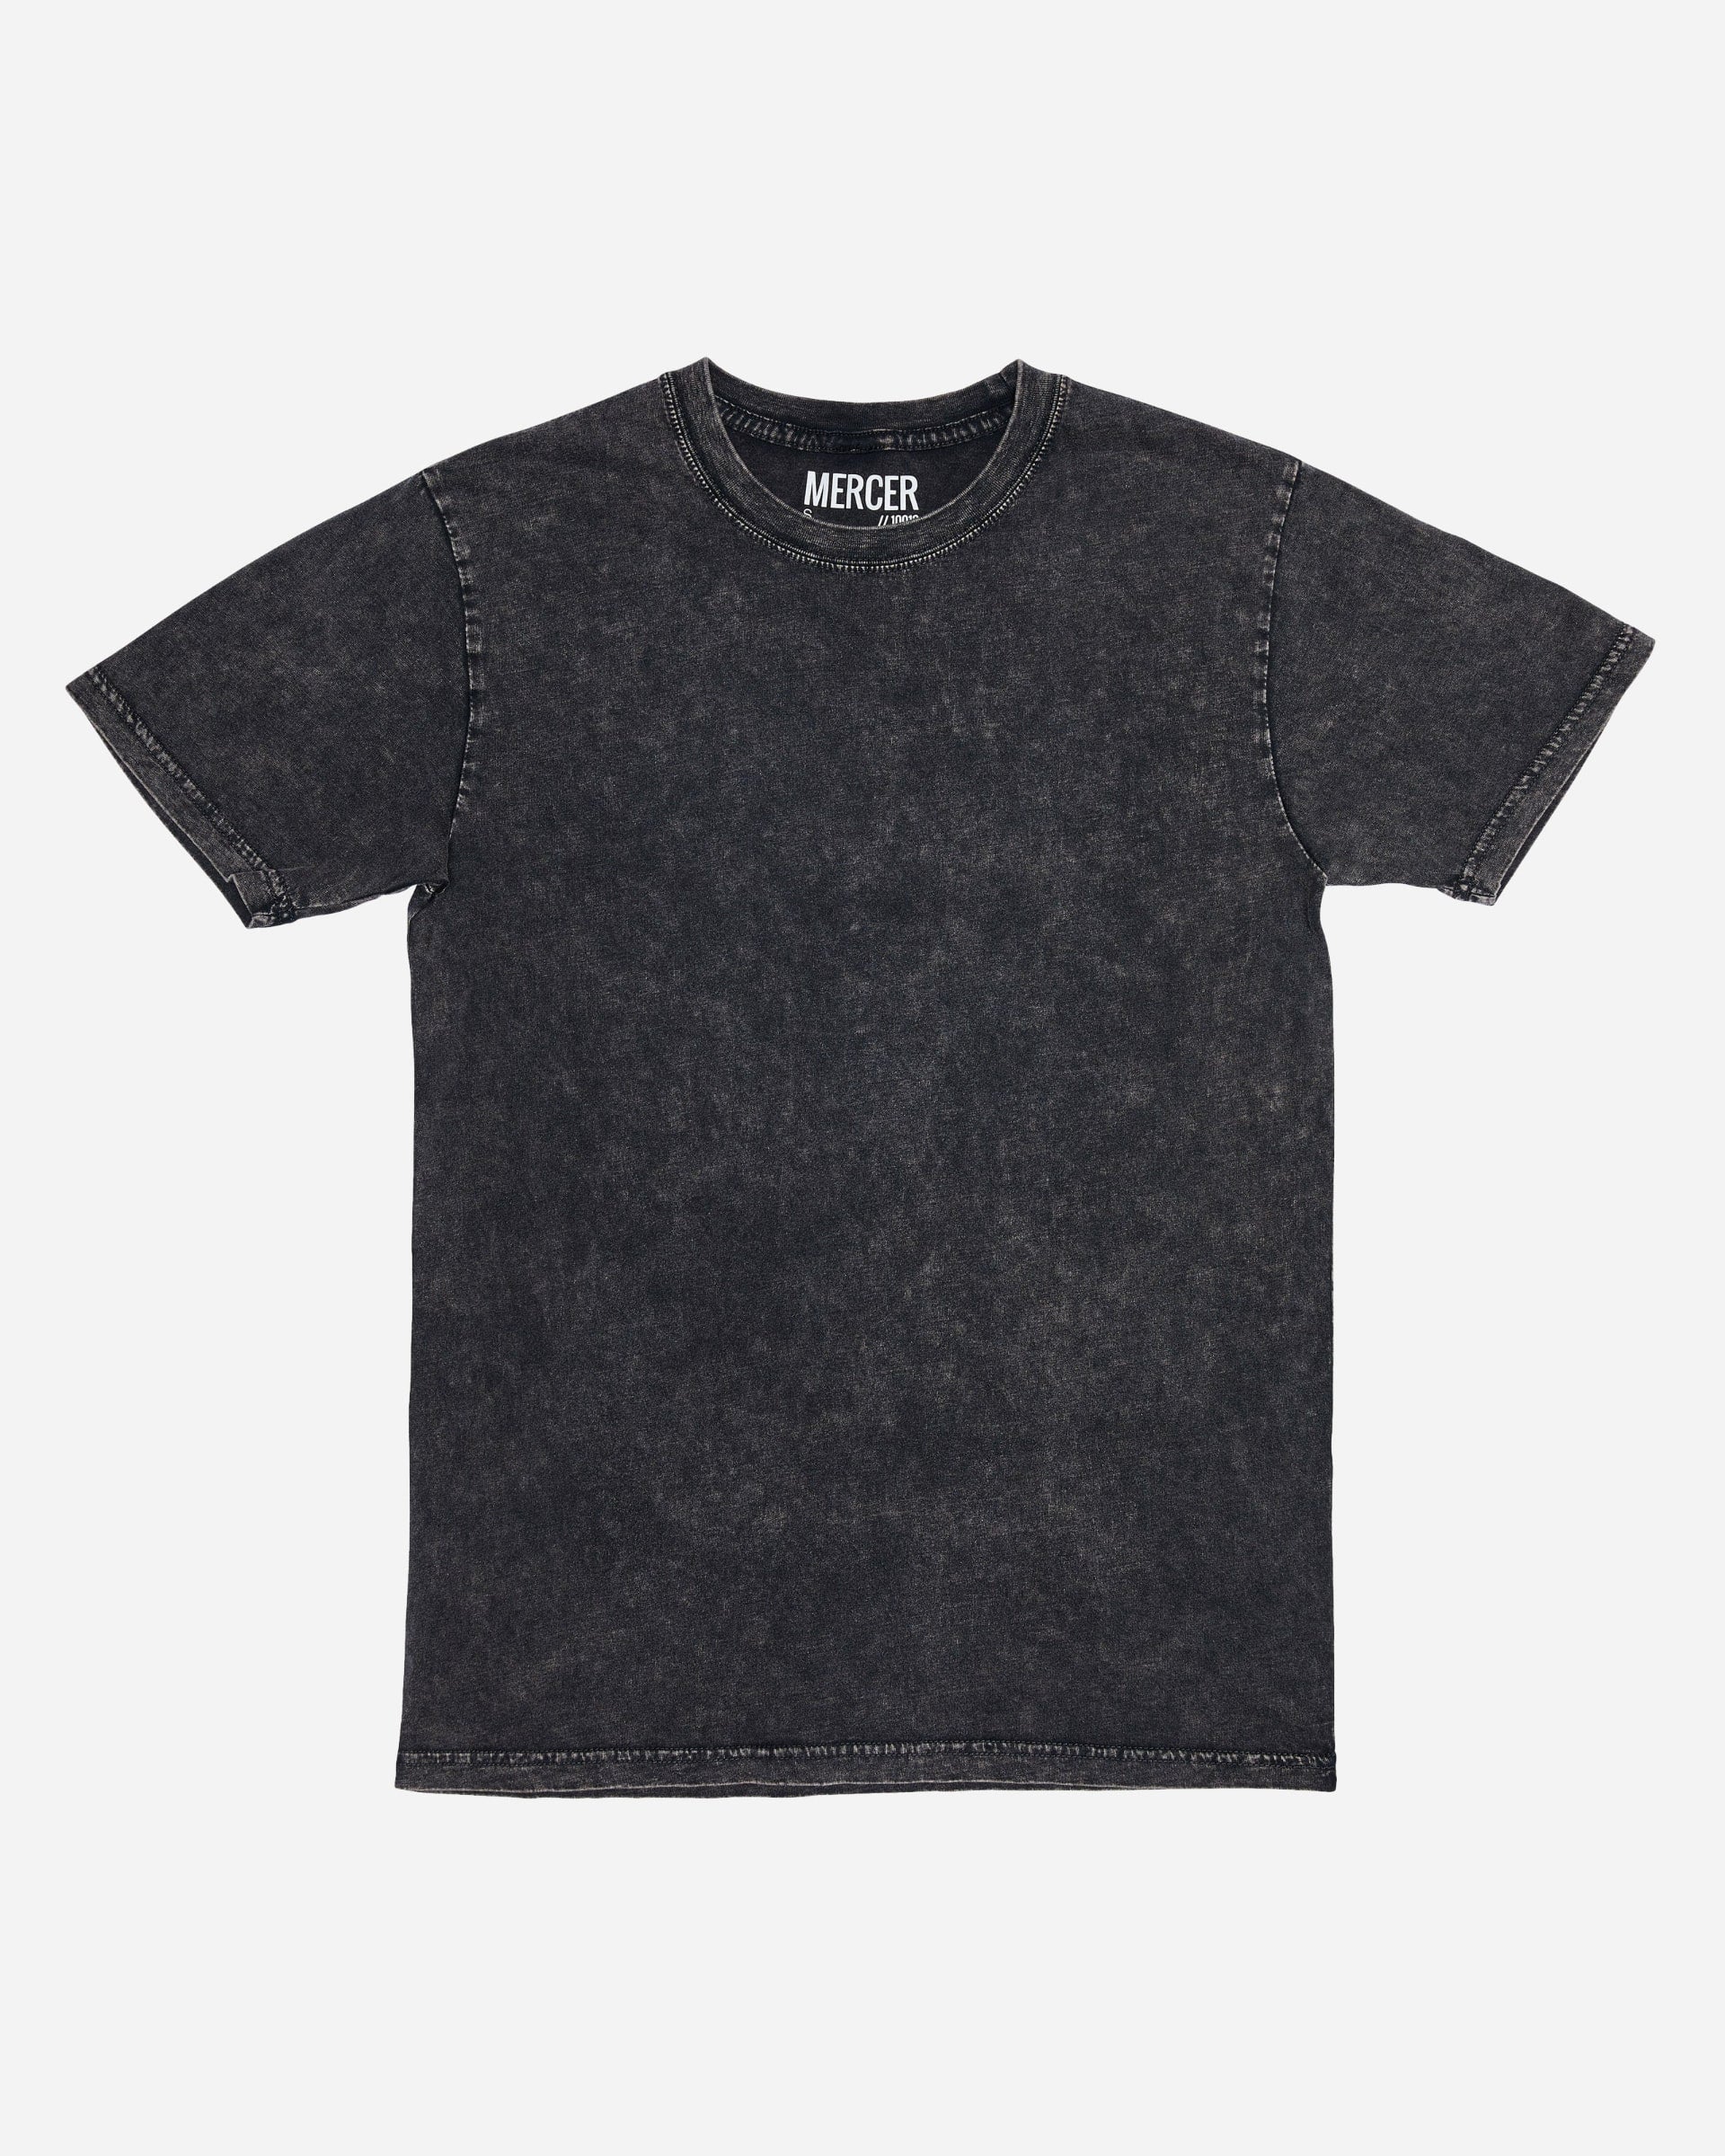 Stone Washed Tee - Men's T-Shirts at Menzclub